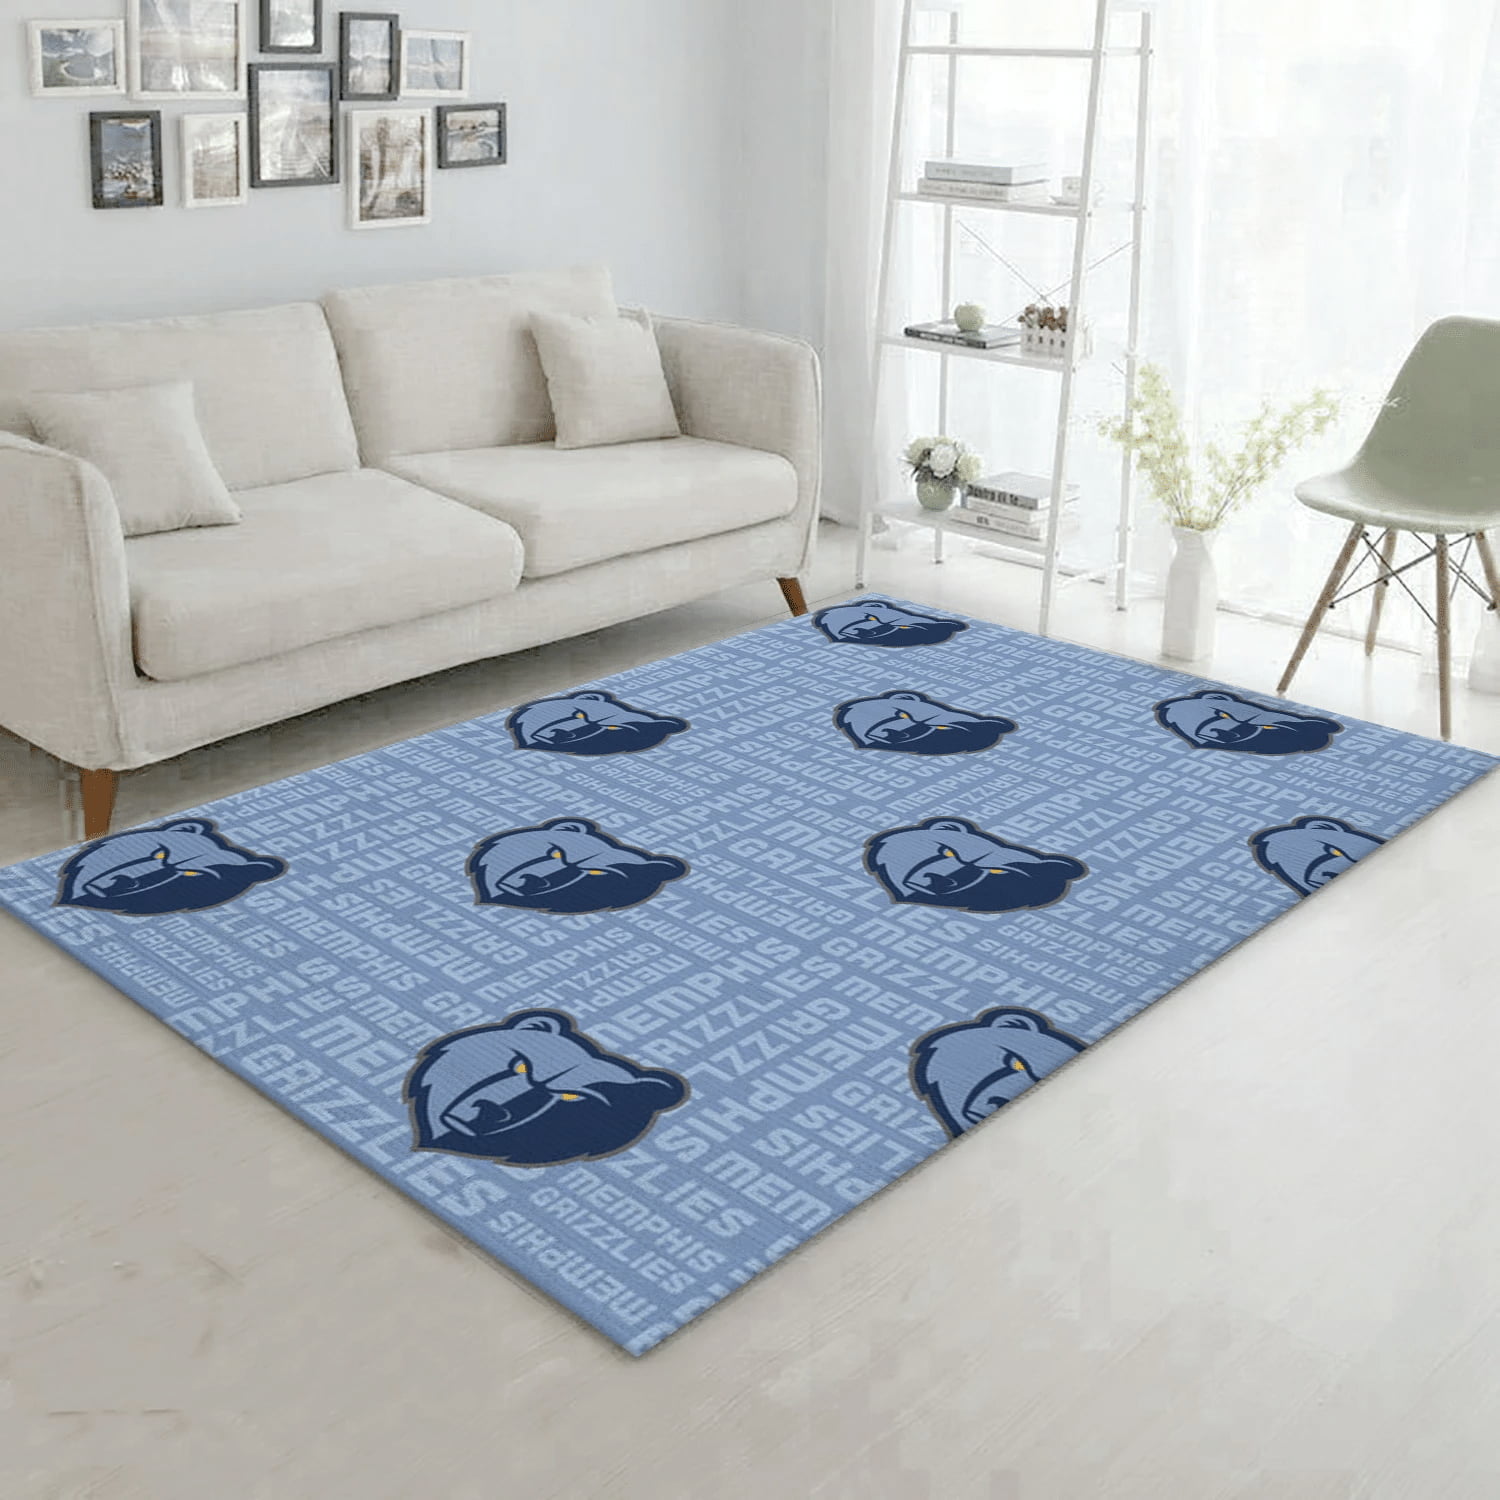 Memphis Grizzlies Patterns Reangle Area Rug, Living Room Rug - Home Decor - Indoor Outdoor Rugs